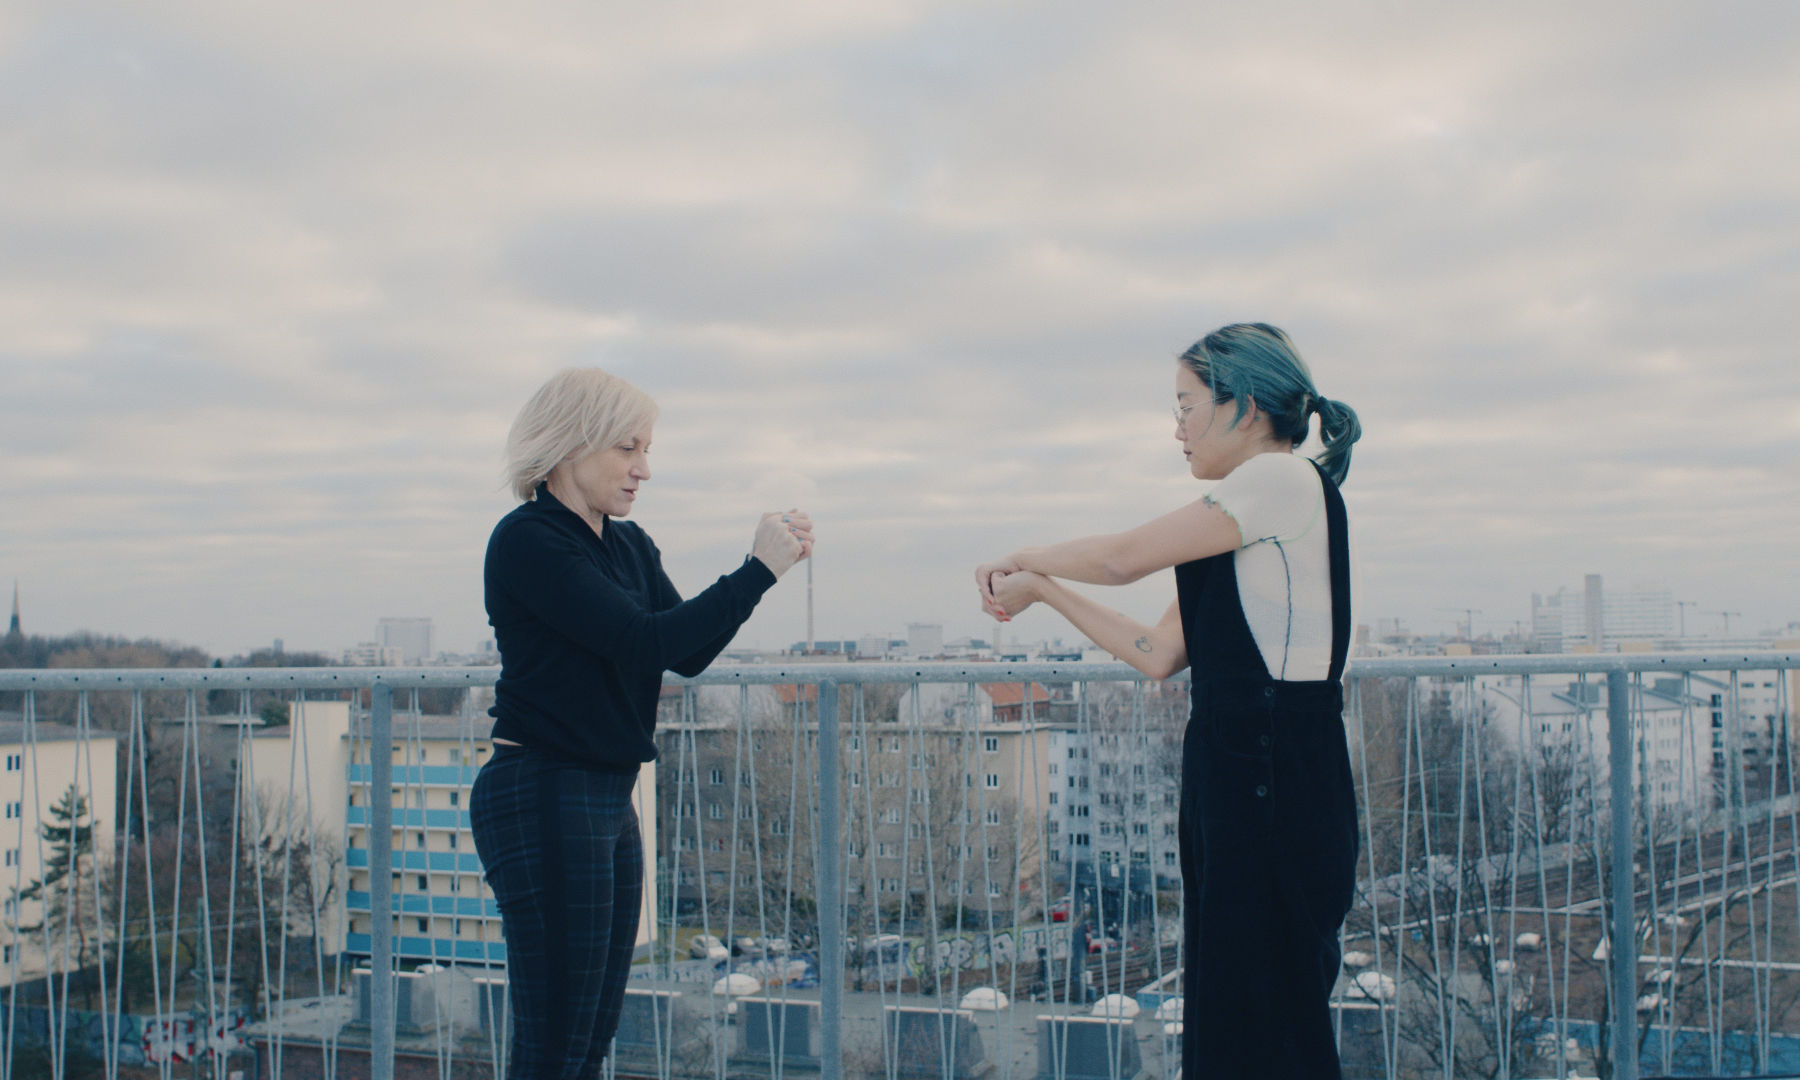 Christine Sun Kim and Meg Stuart dancing on a roof top, Berlin skyline in the background